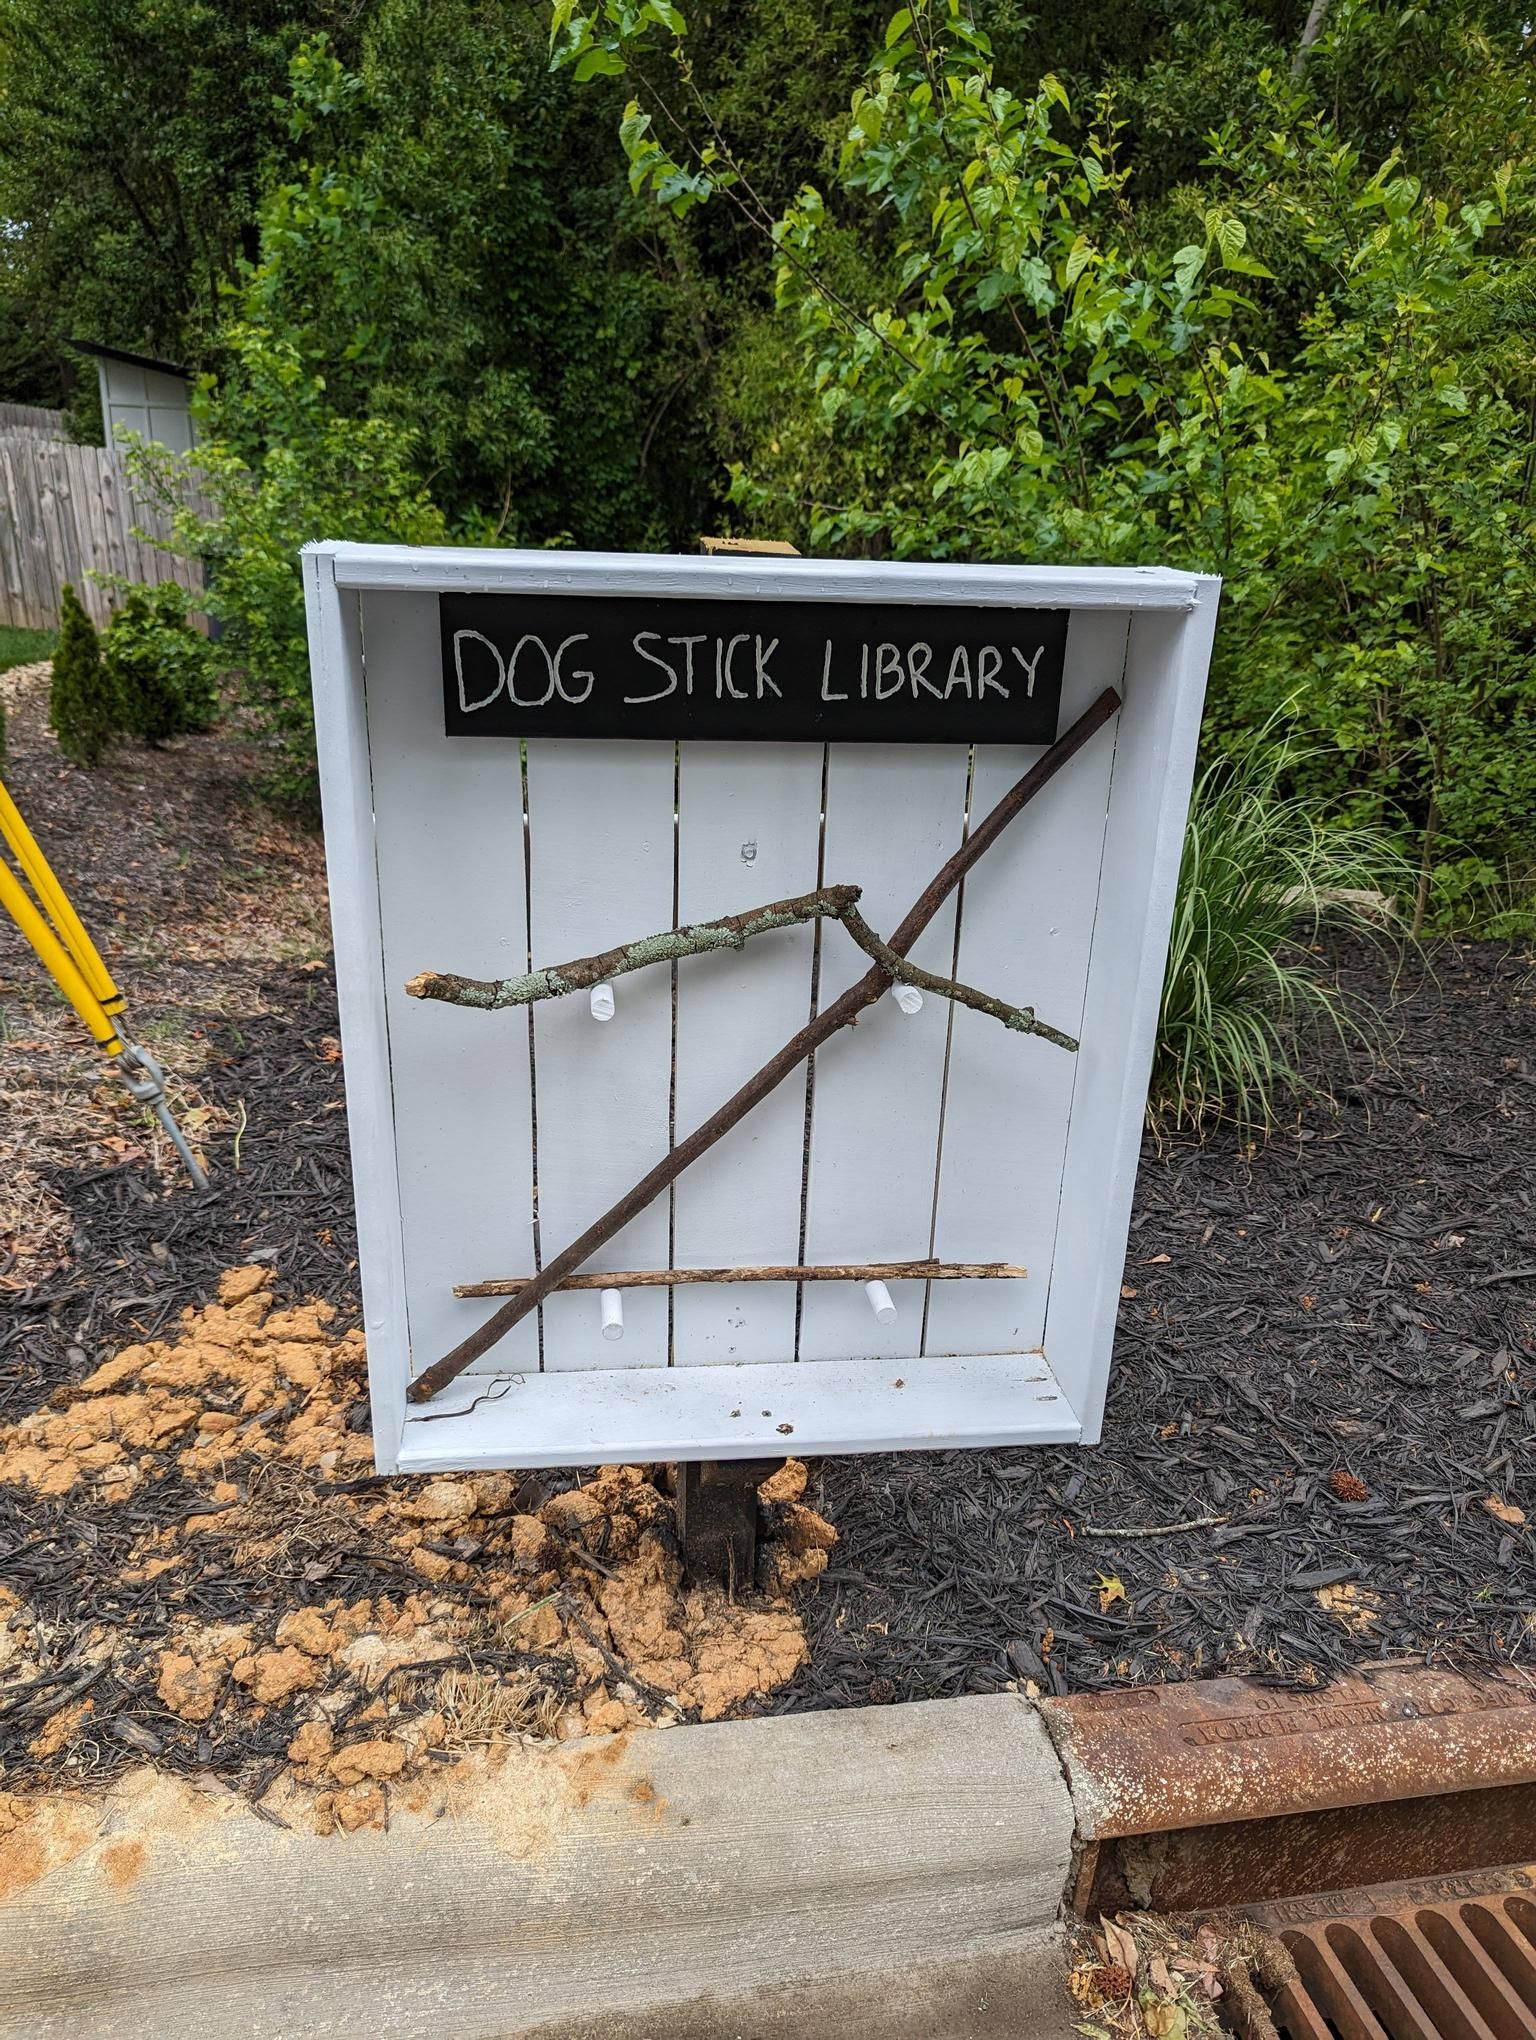 Best small library ever popped up in our neighborhood